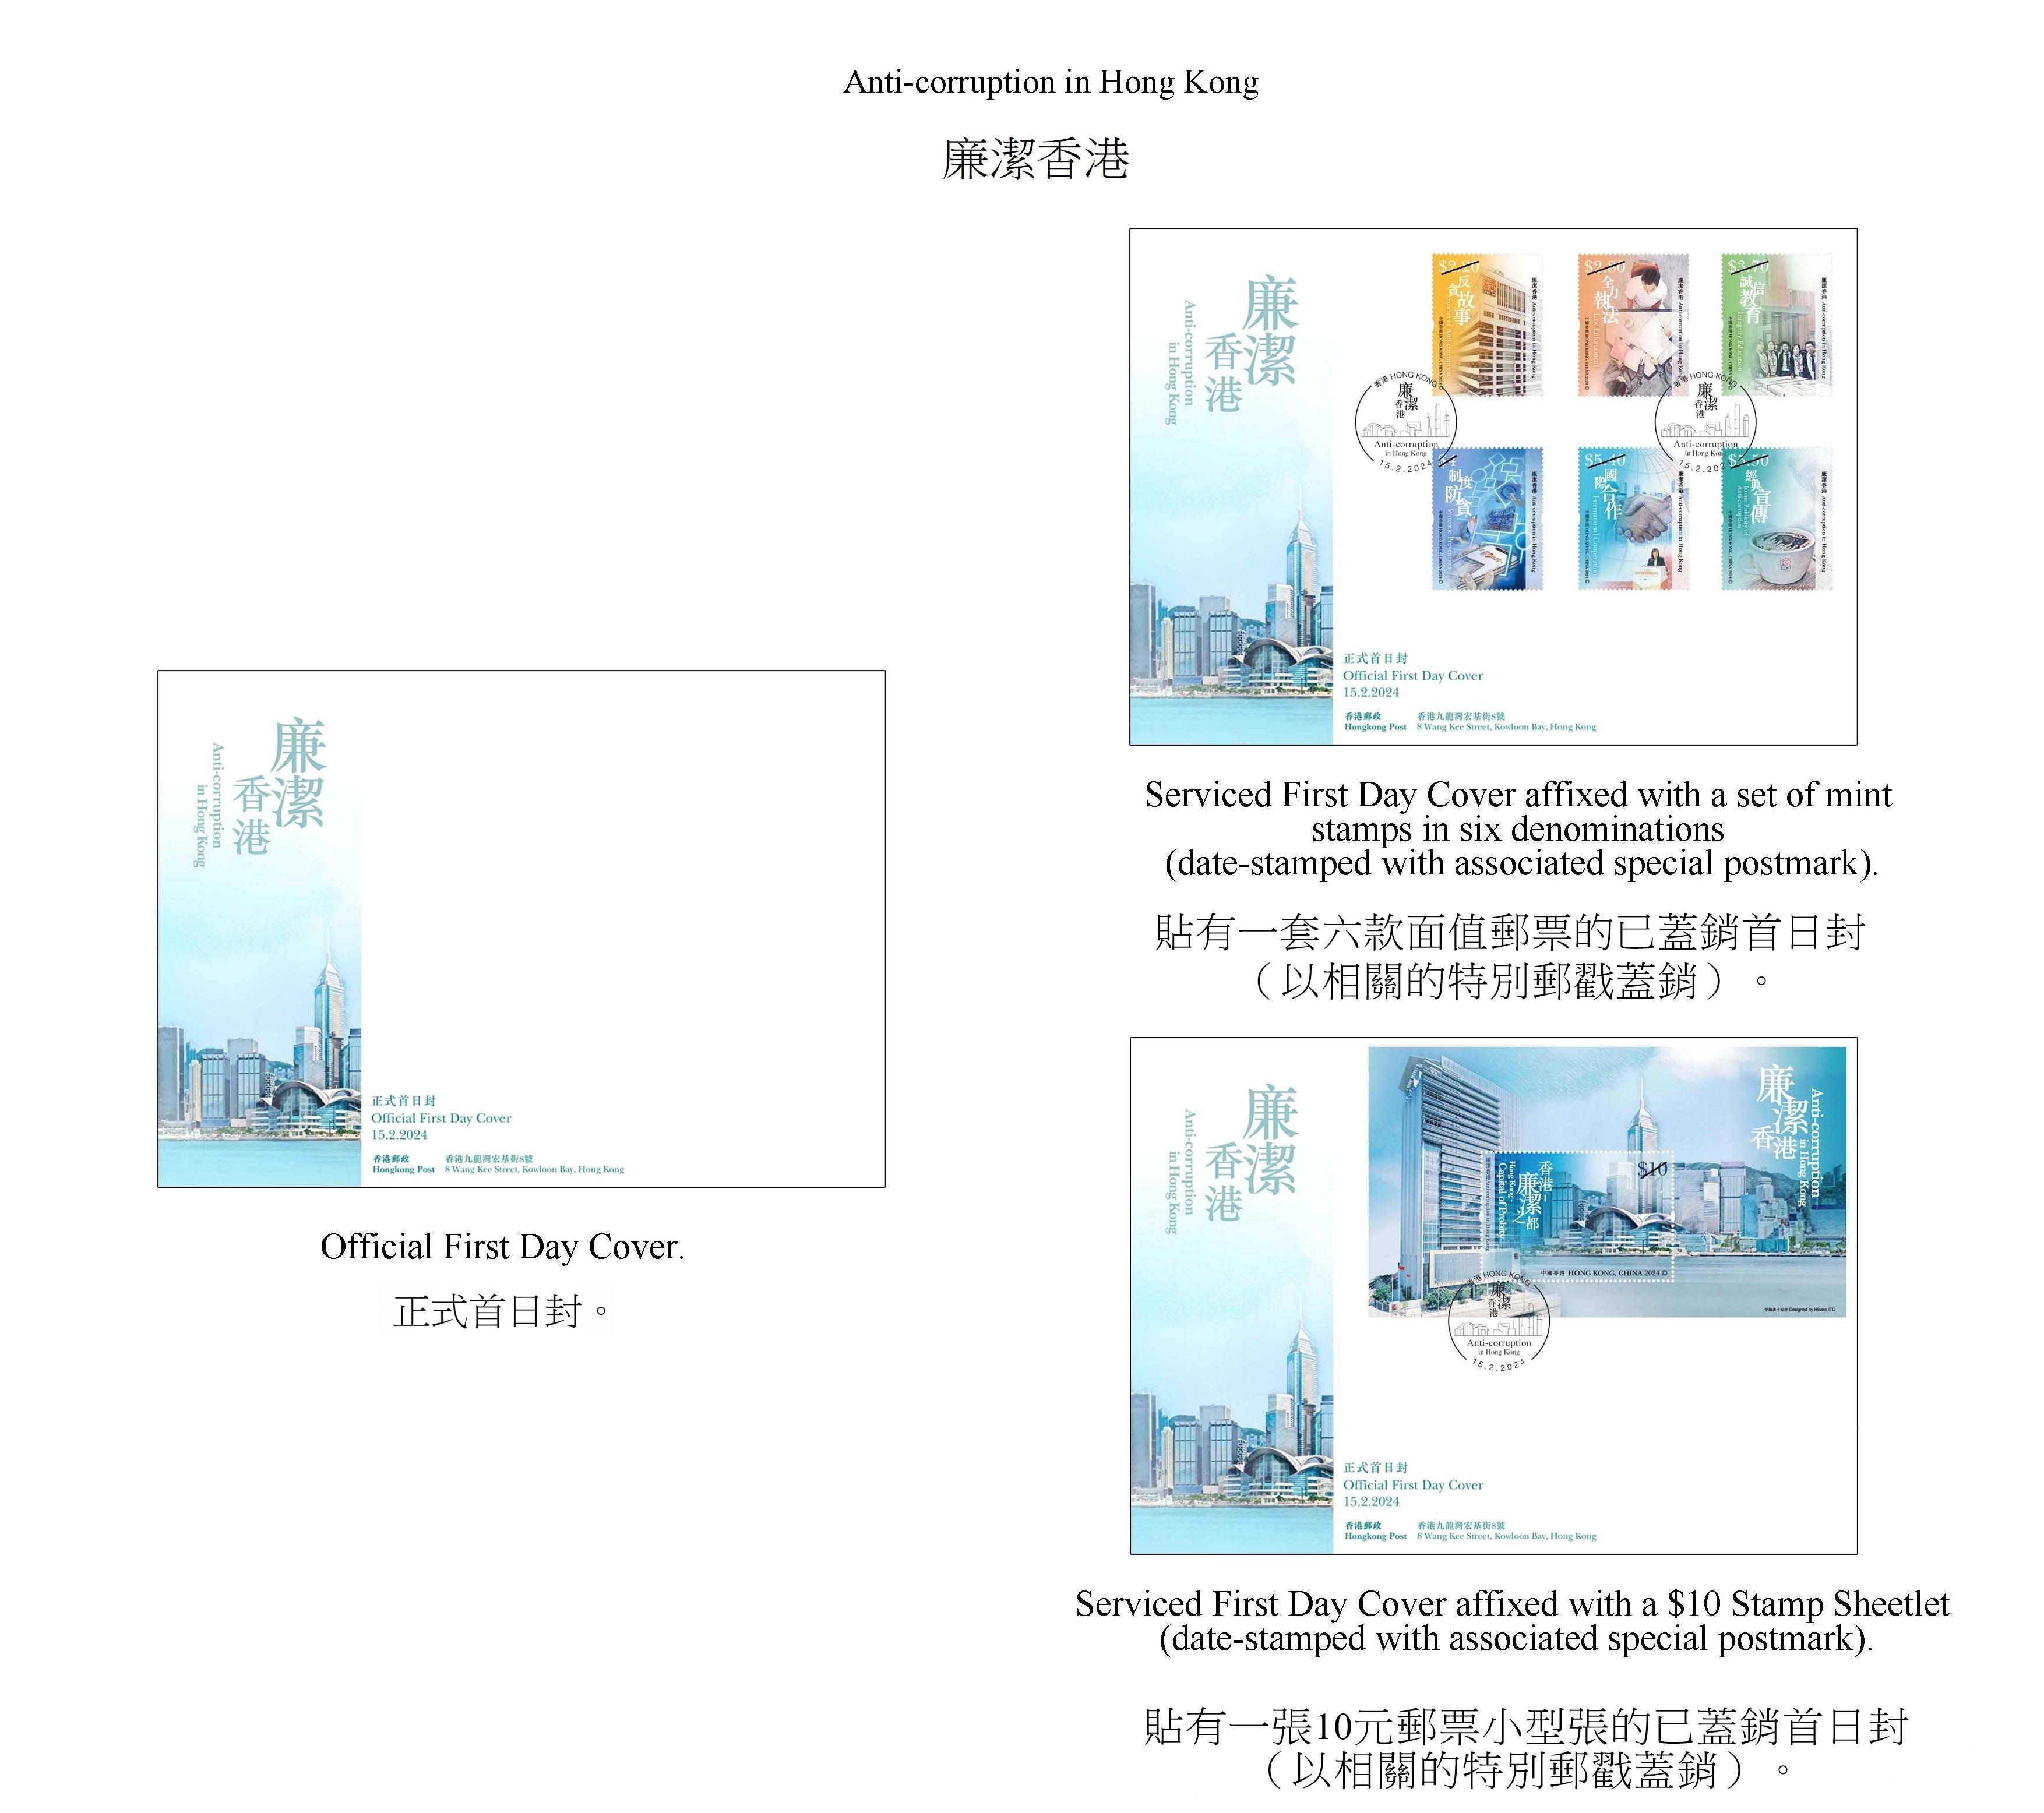 Hongkong Post will launch a special stamp issue and associated philatelic products on the theme of “Anti-corruption in Hong Kong” on February 15 (Thursday).  Photos show the first day covers.

